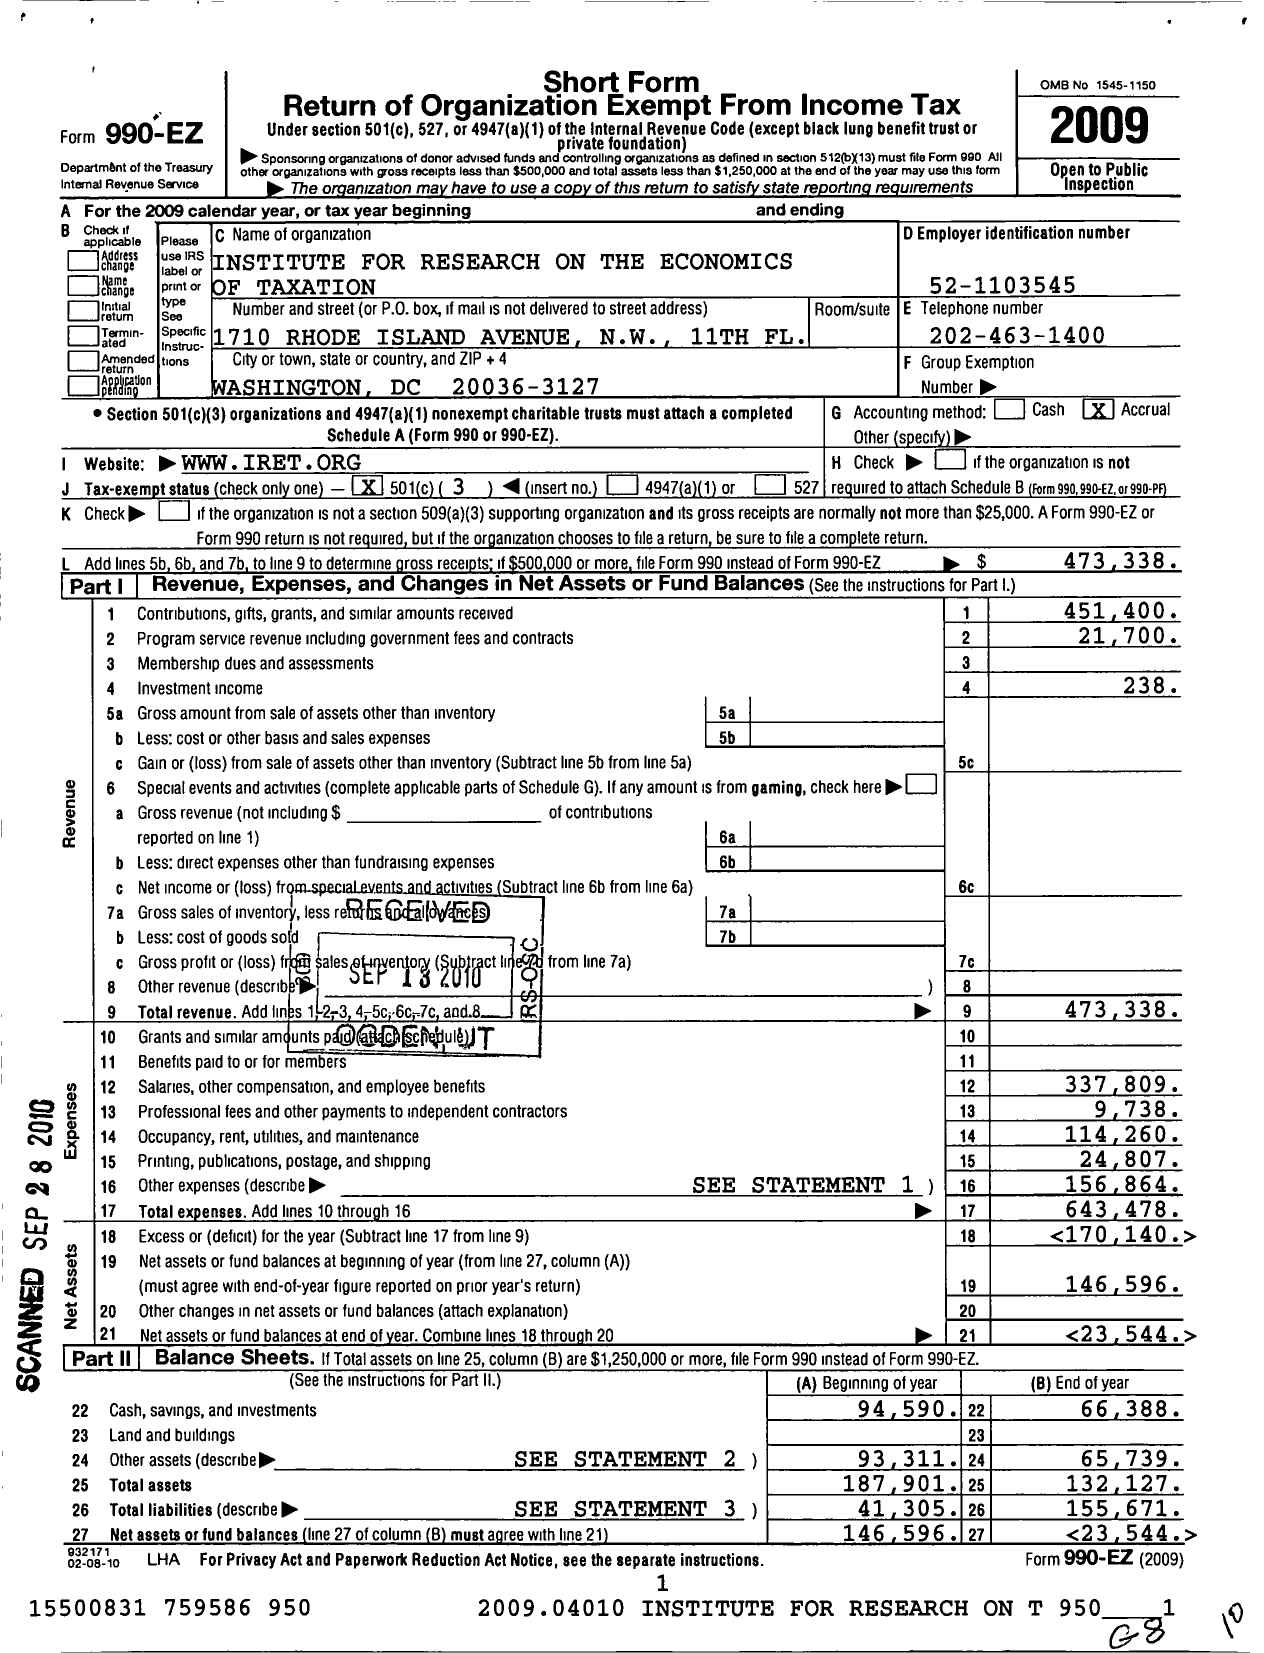 Image of first page of 2009 Form 990EZ for Institute for Research on the Economics of Taxation